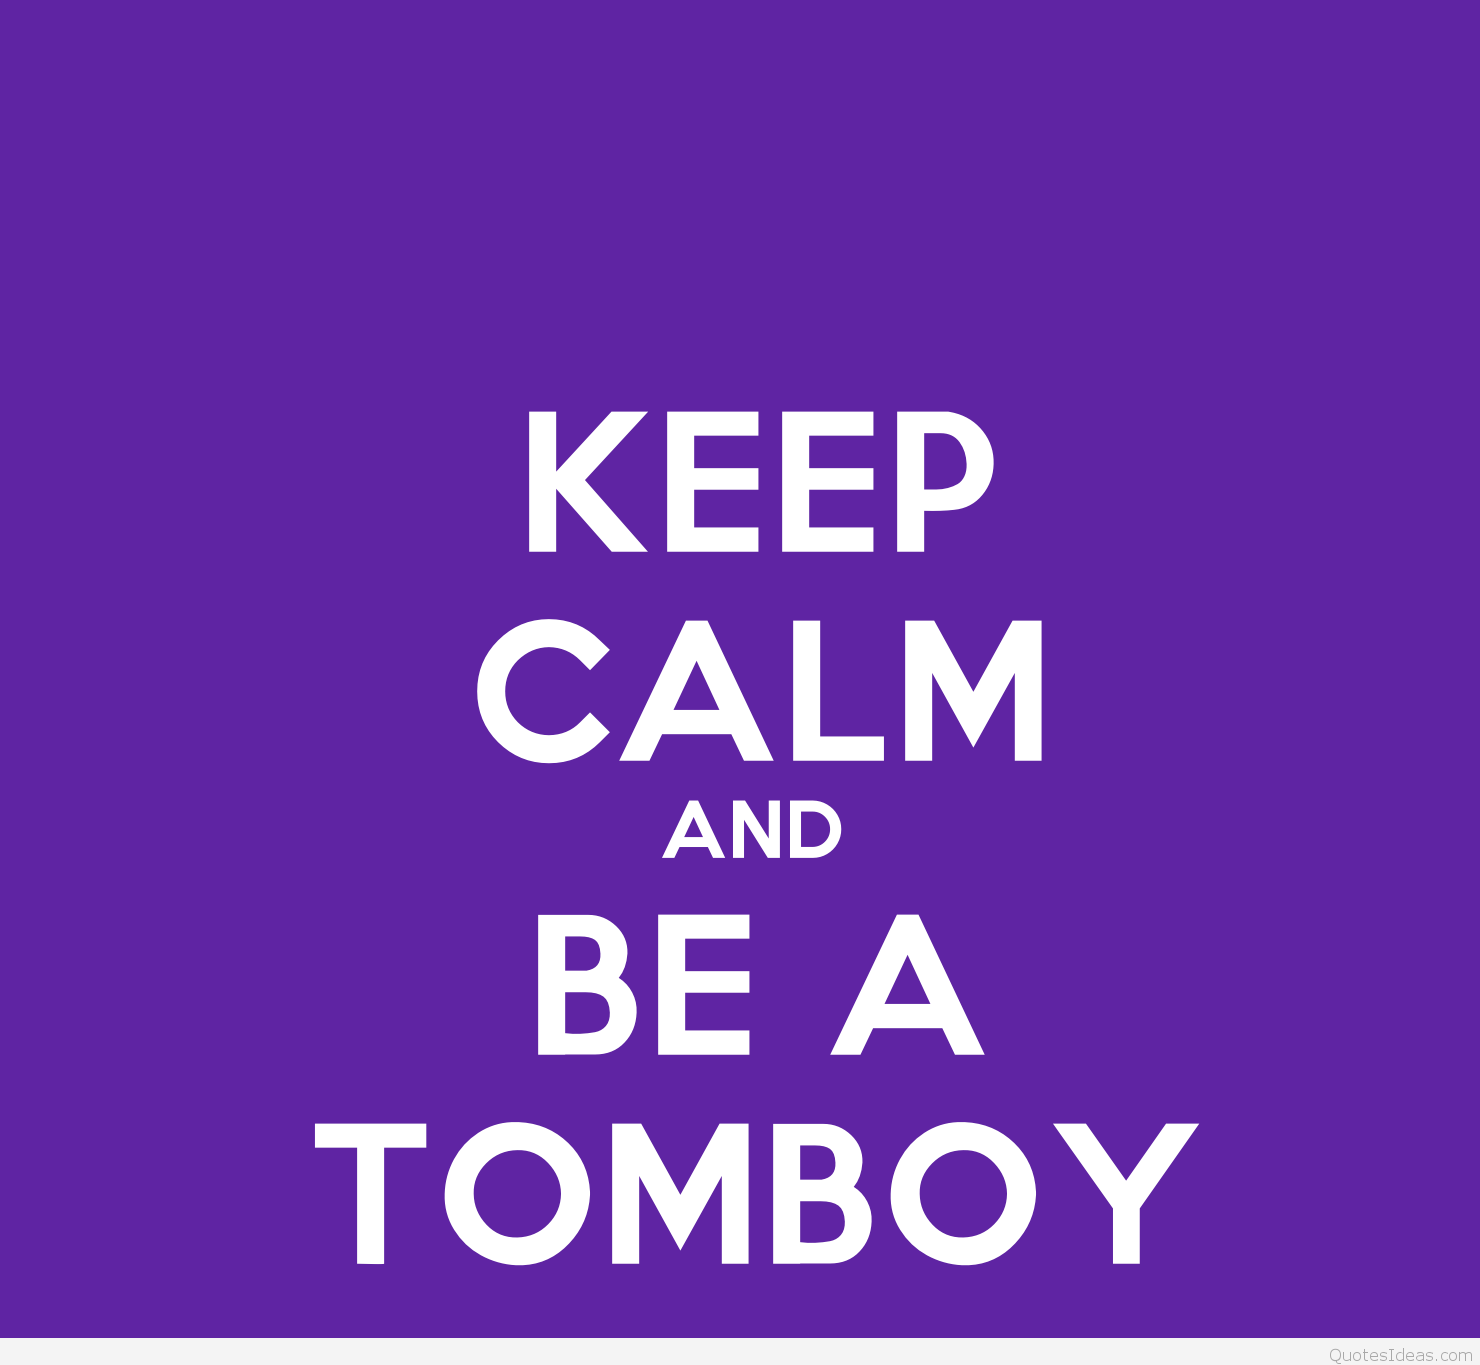 HD Tomboy Wallpaper. Download Free. Tomboy quotes, Tomboy, Quote iphone